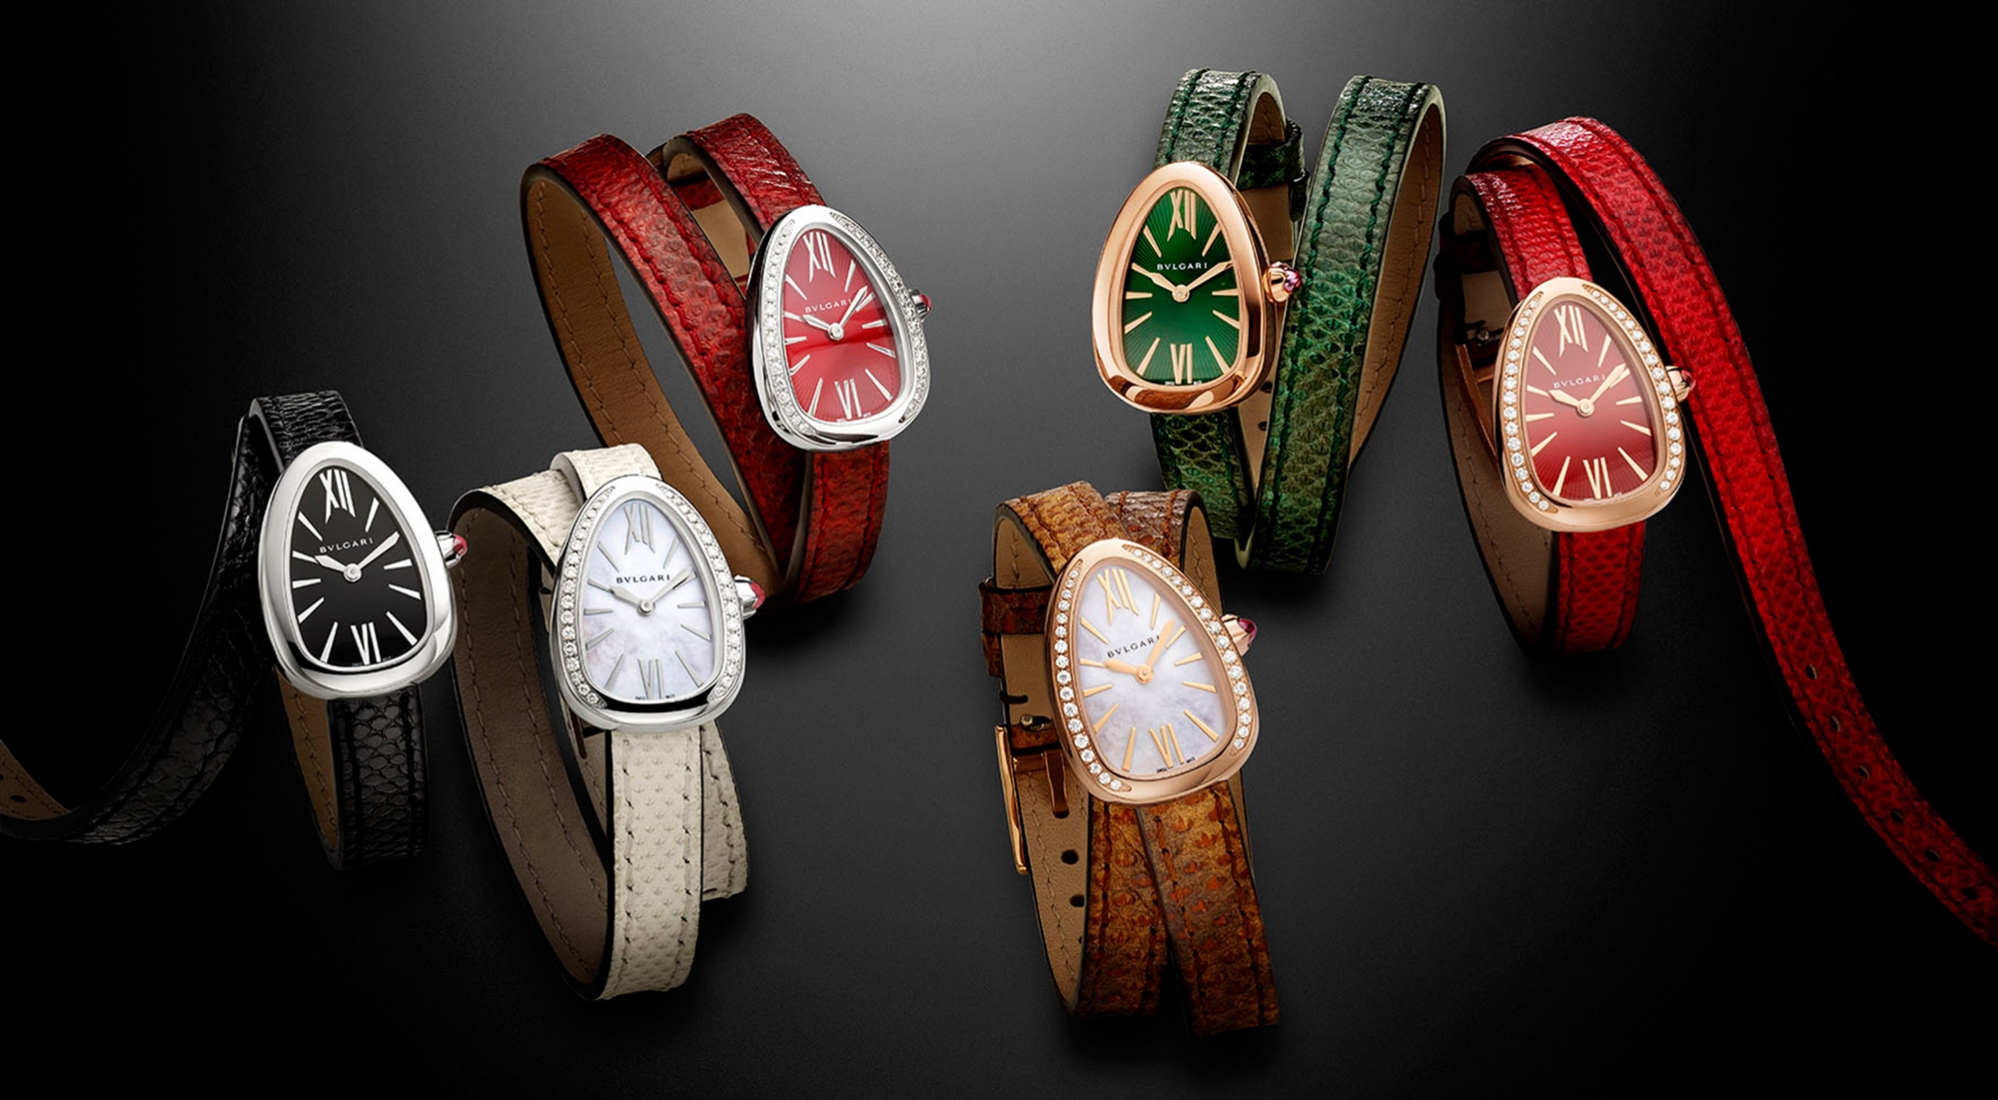 Baselworld 2014: new Louis Vuitton jewellery watches for women